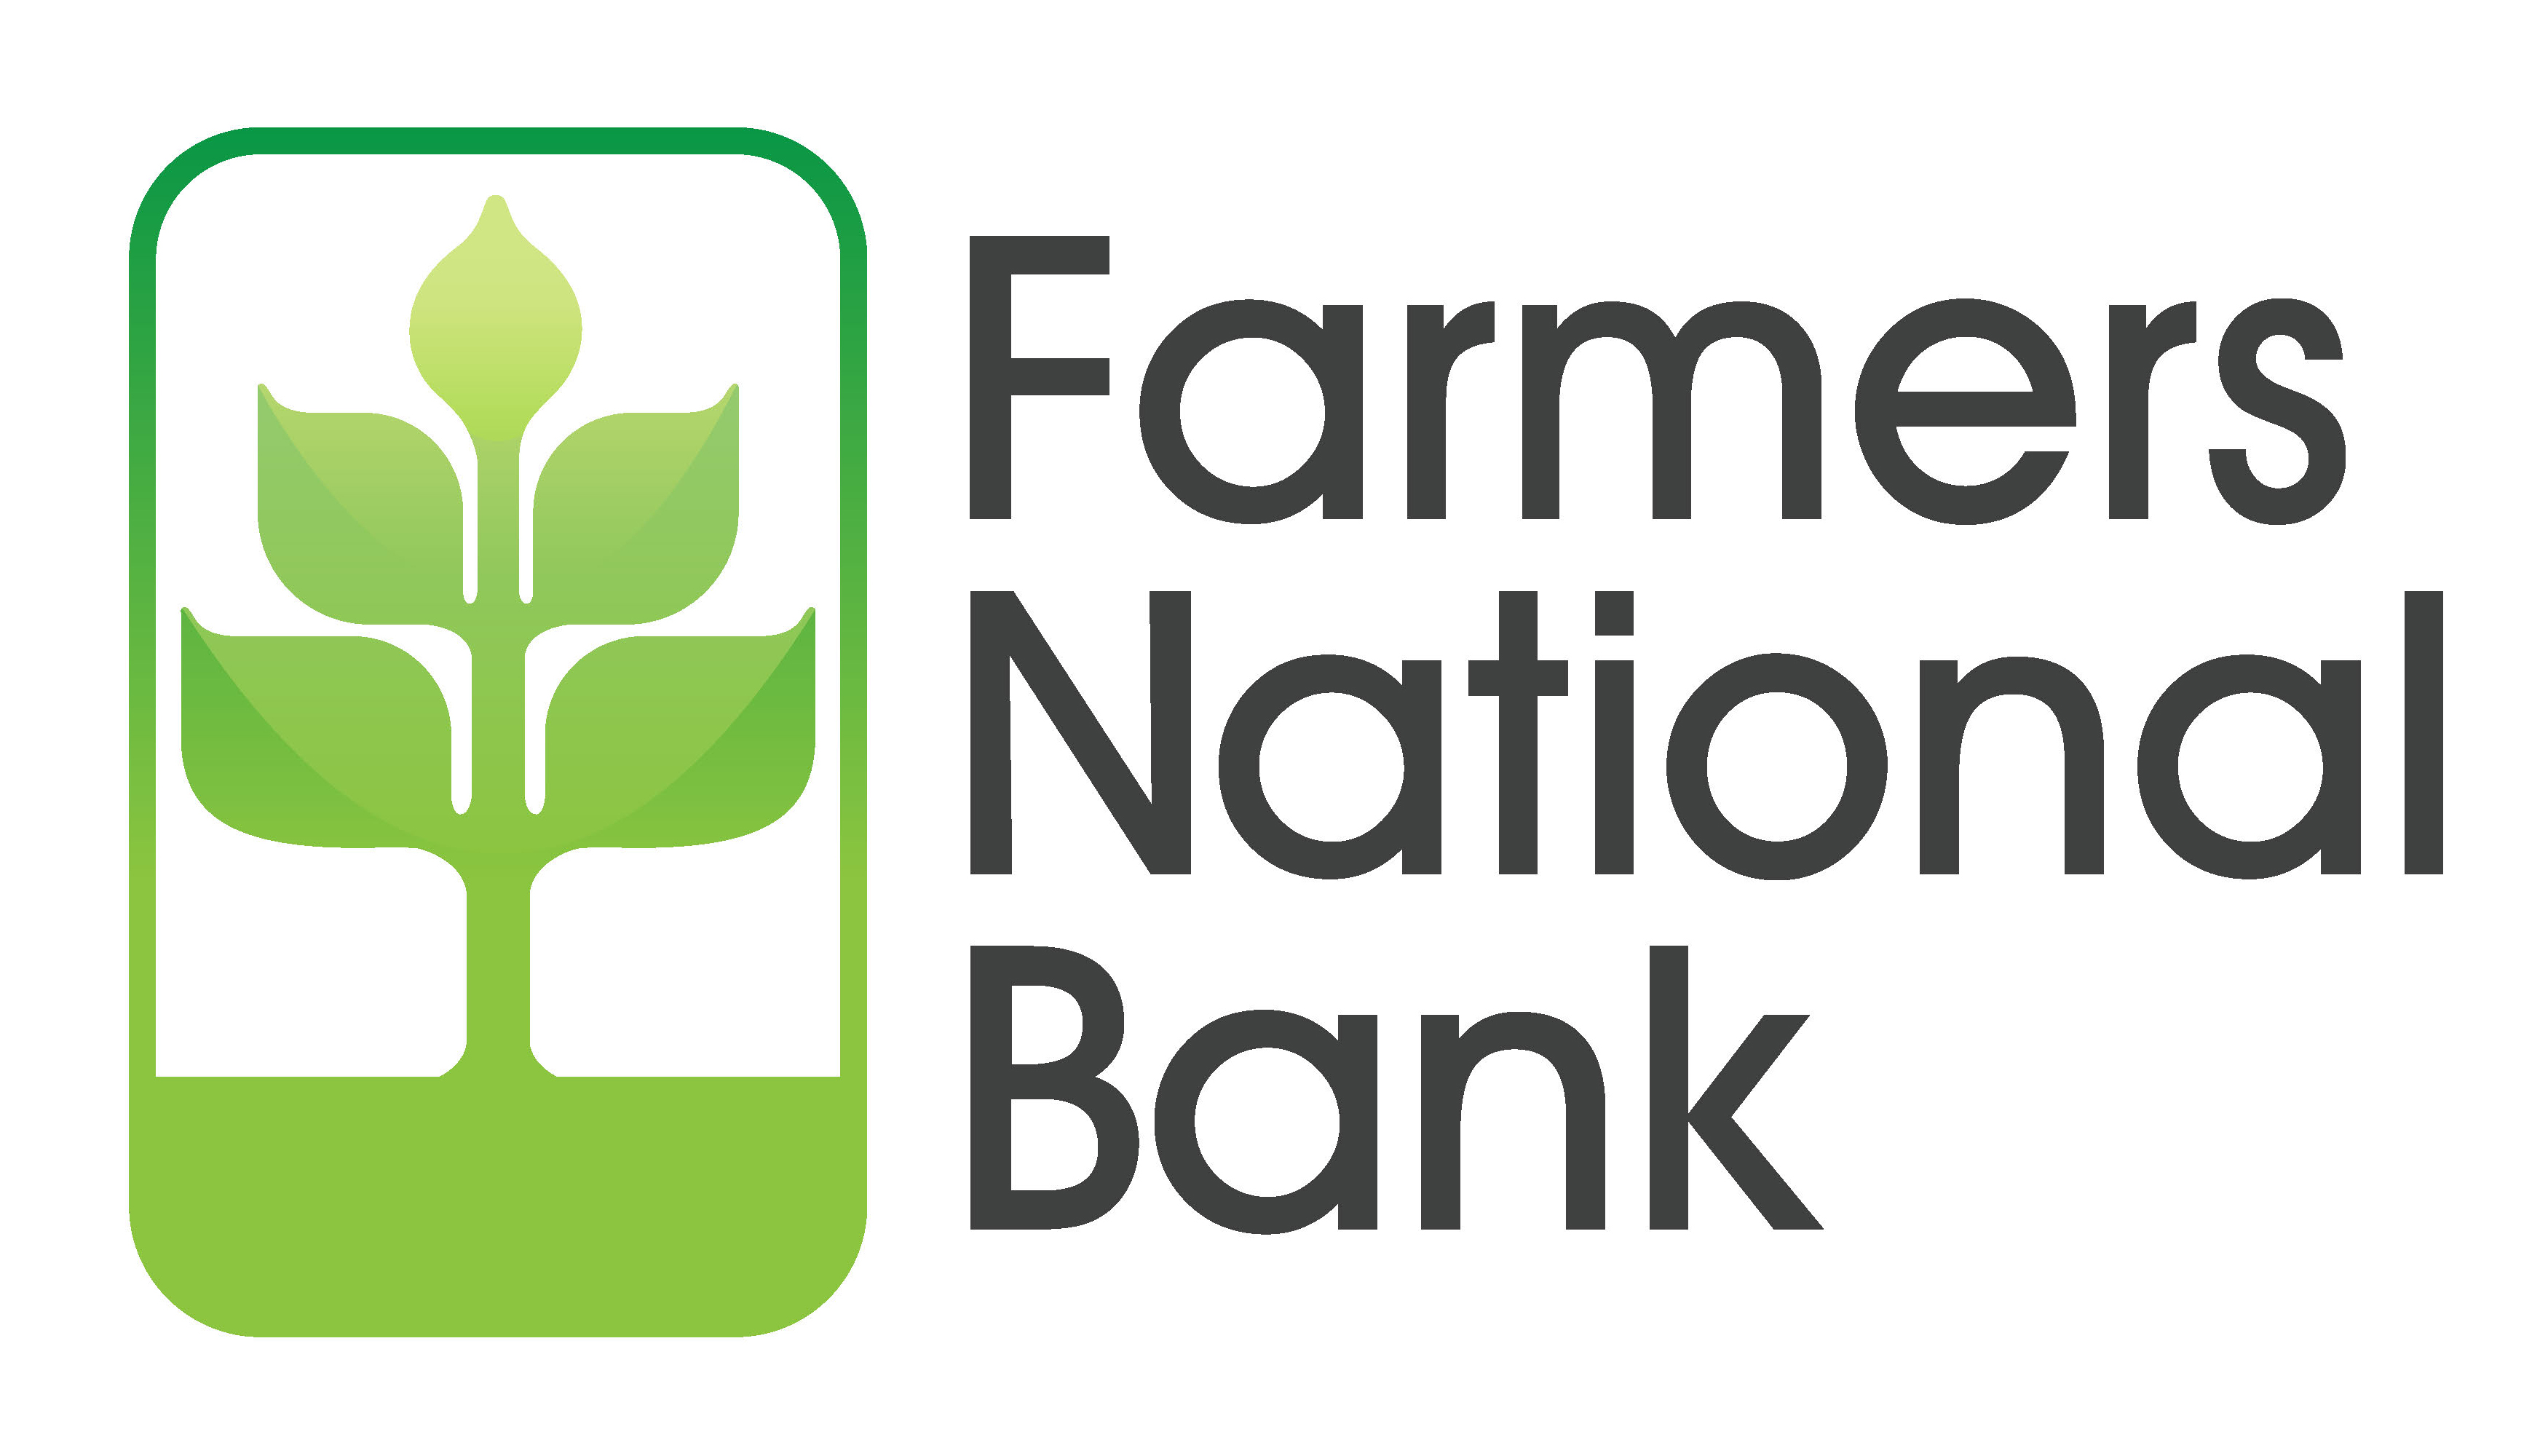 Farmers National Bank of Canfield